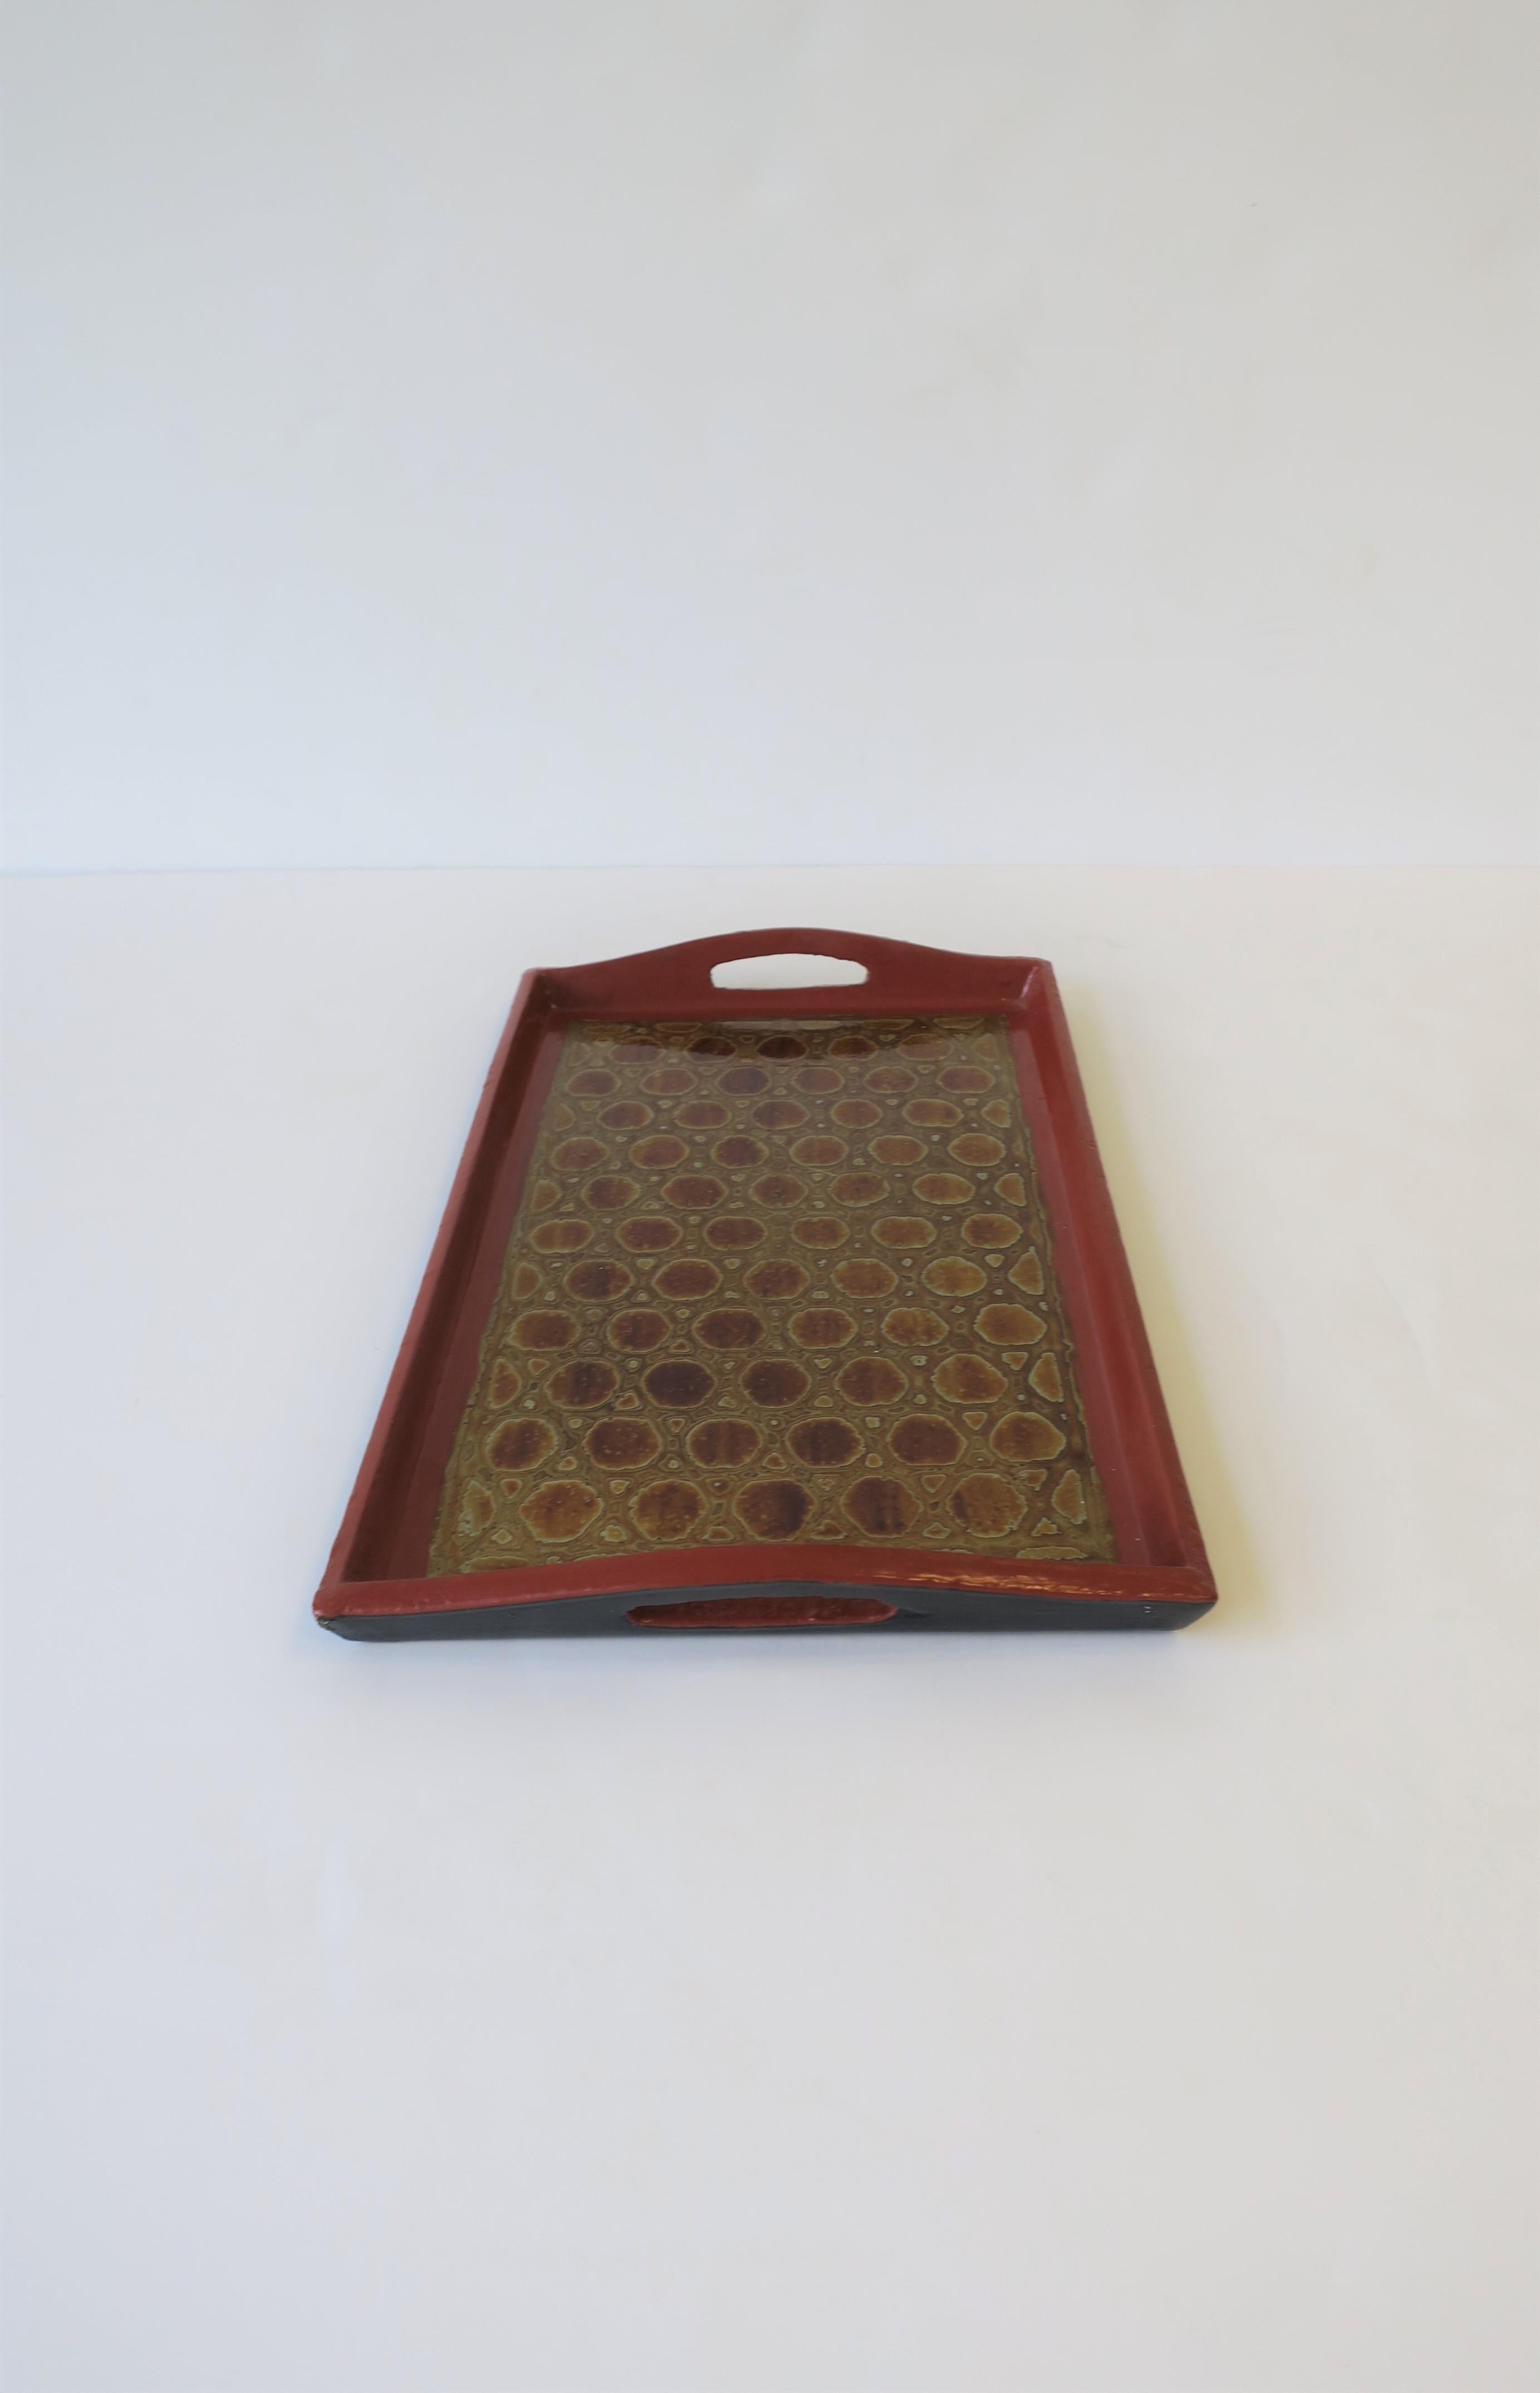 Red Burgundy, Gold and Black Lacquer Tray with Reptile-esque Design 7